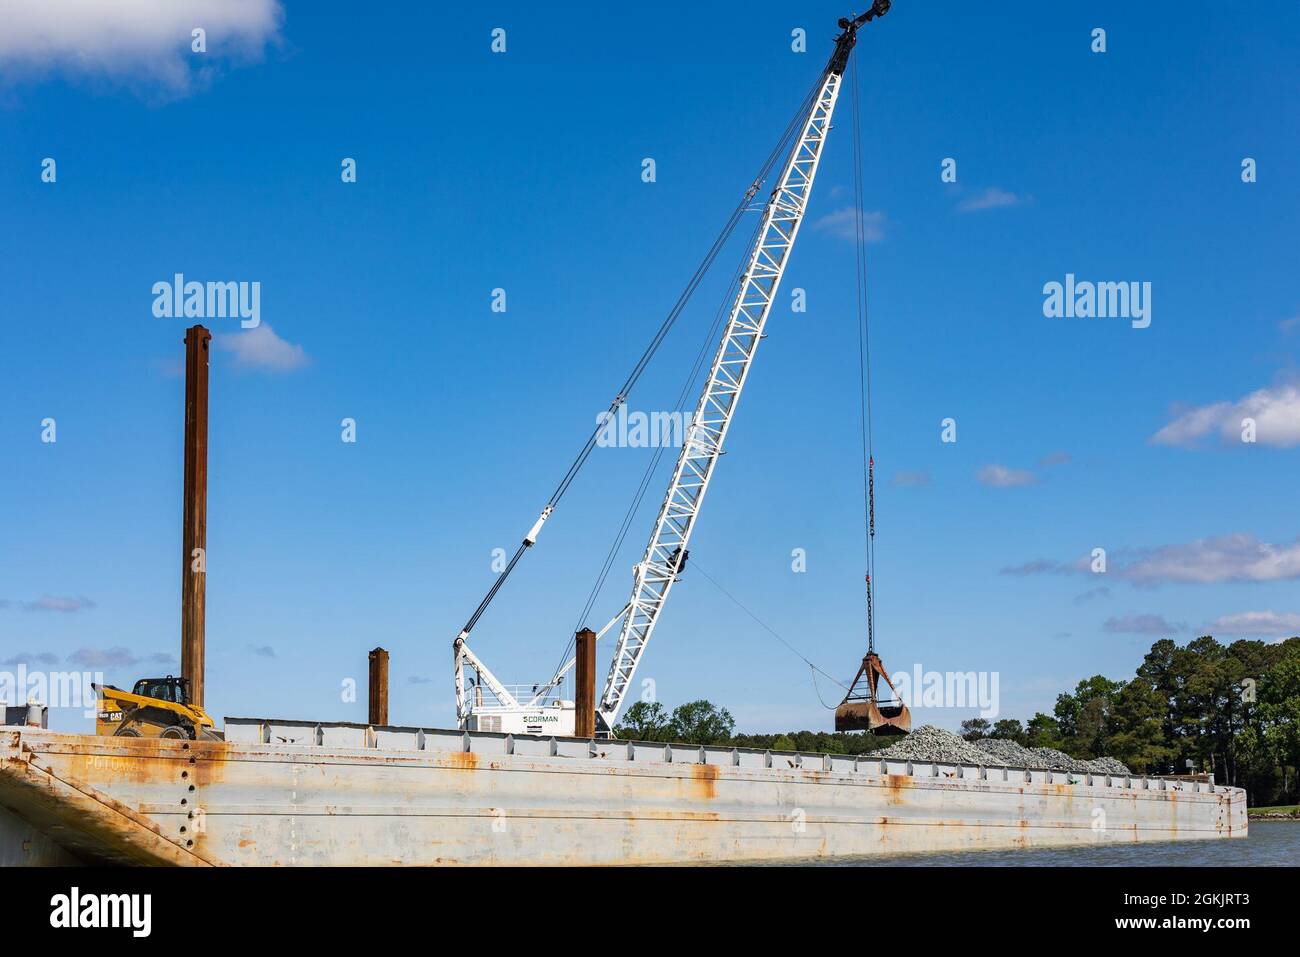 A clamshell bucket moves to pick up rocks from a barge to place in the Tred Avon River Oyster Sanctuary in Talbot County, Maryland May 6, 2021. Stock Photo